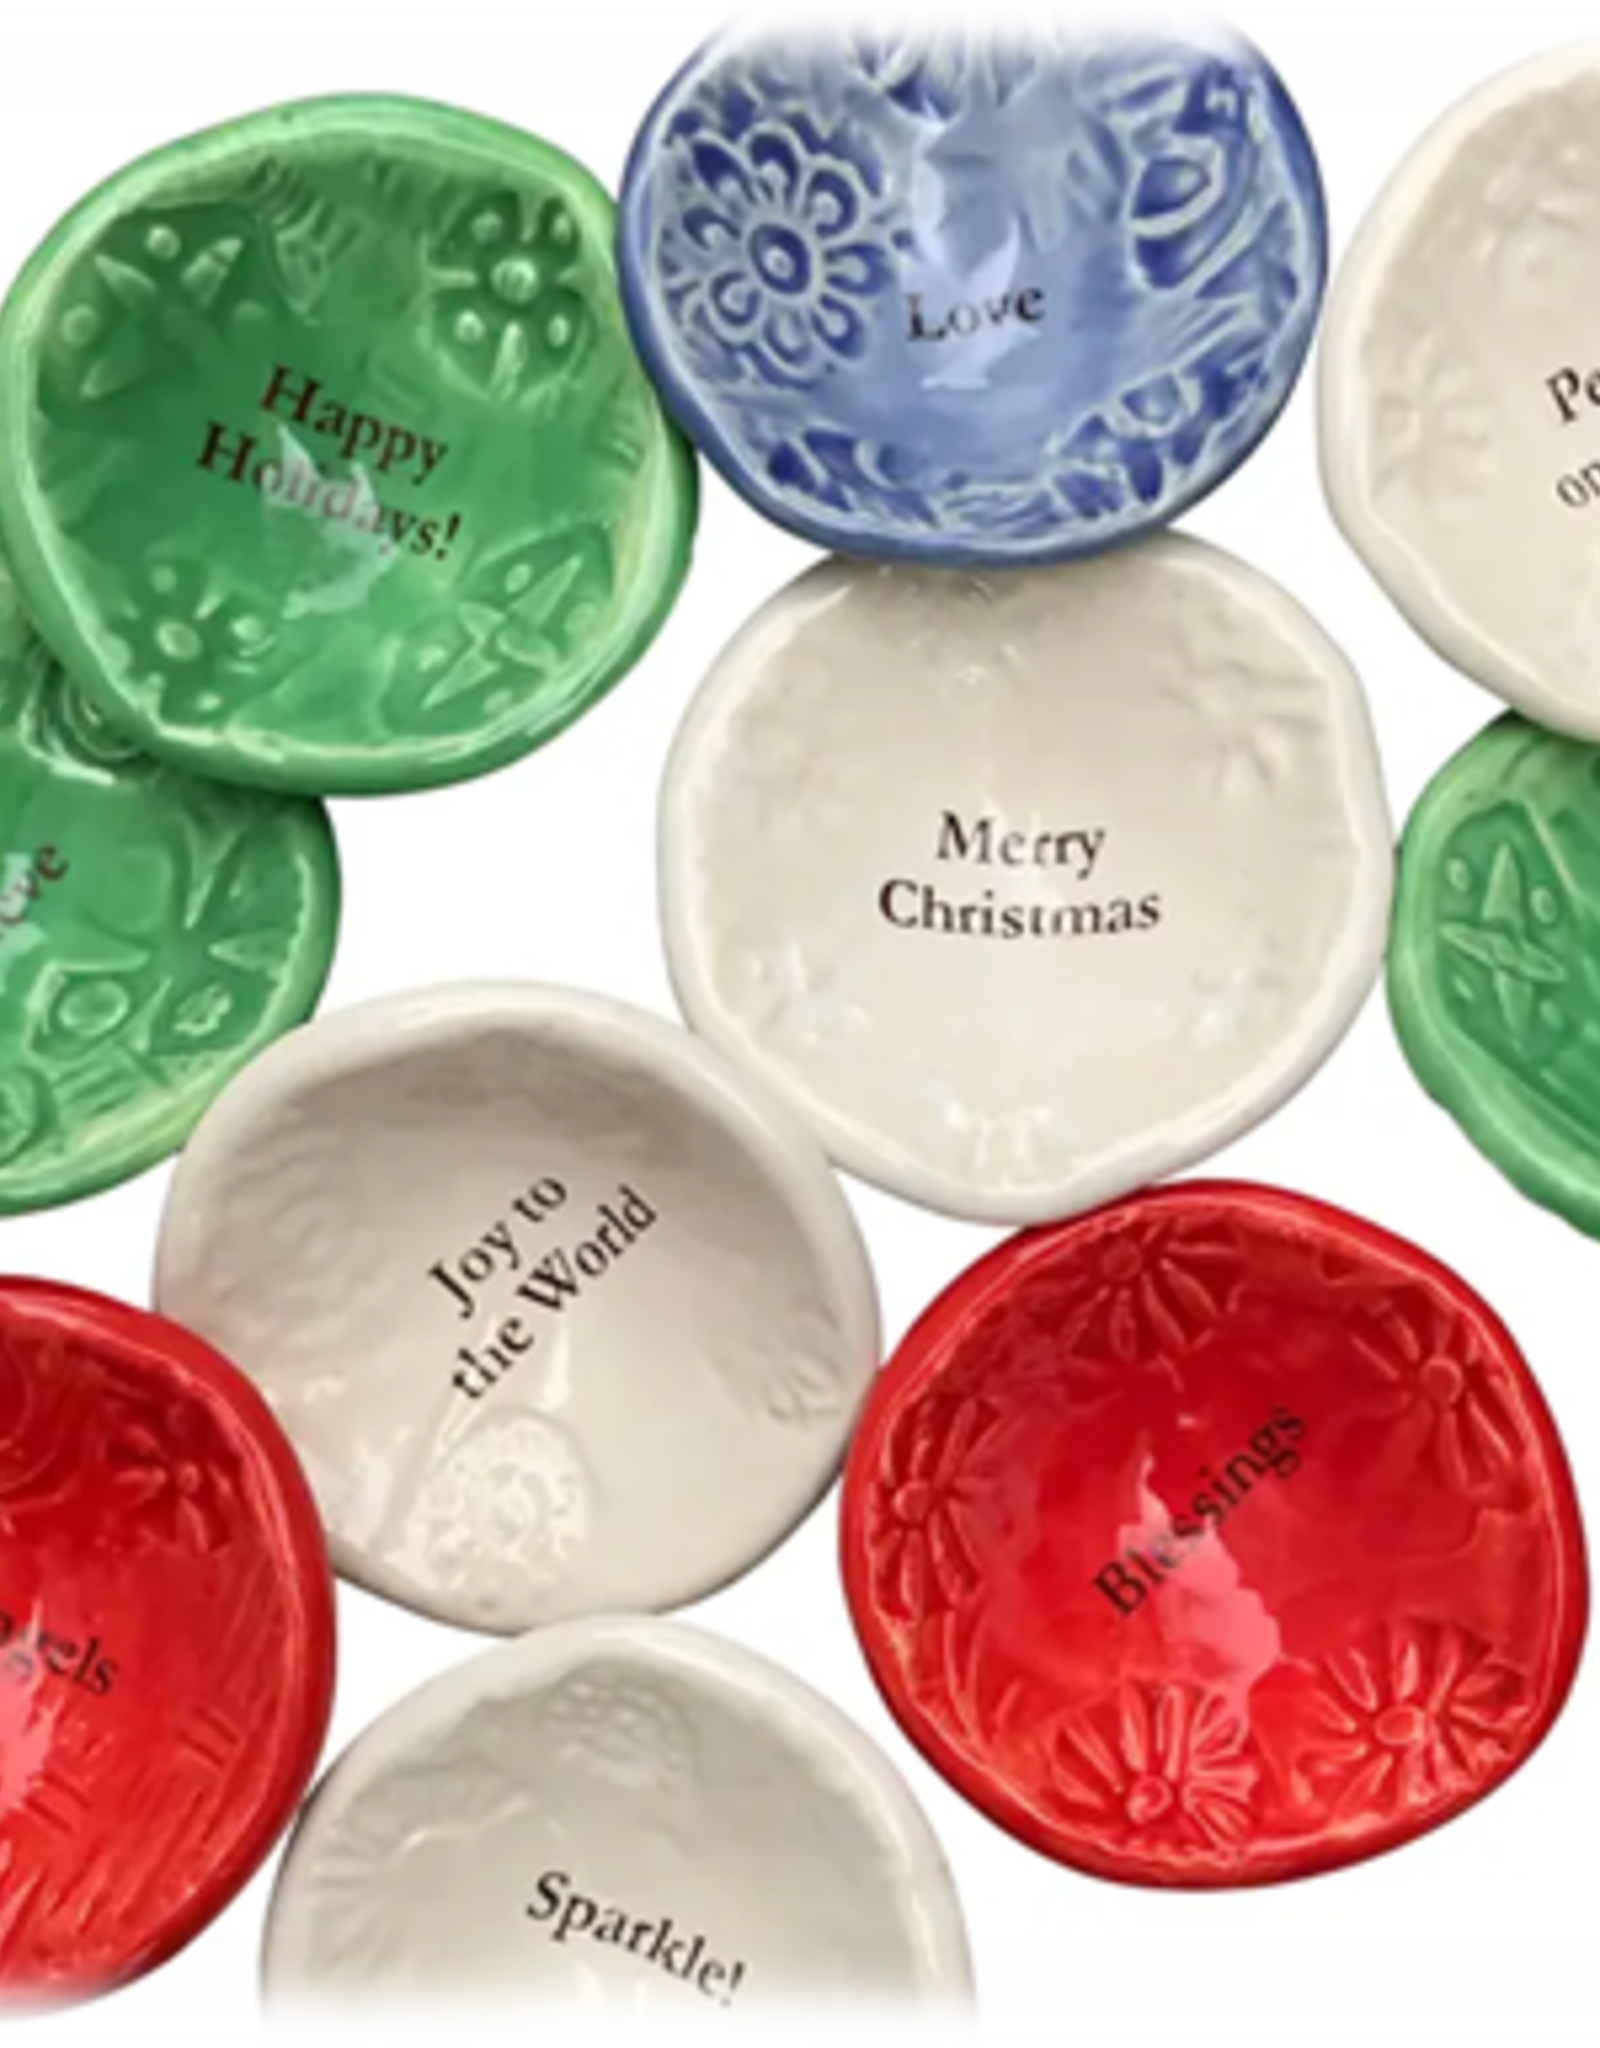 Lorraine Oerth & Co. Christmas Giving Bowls